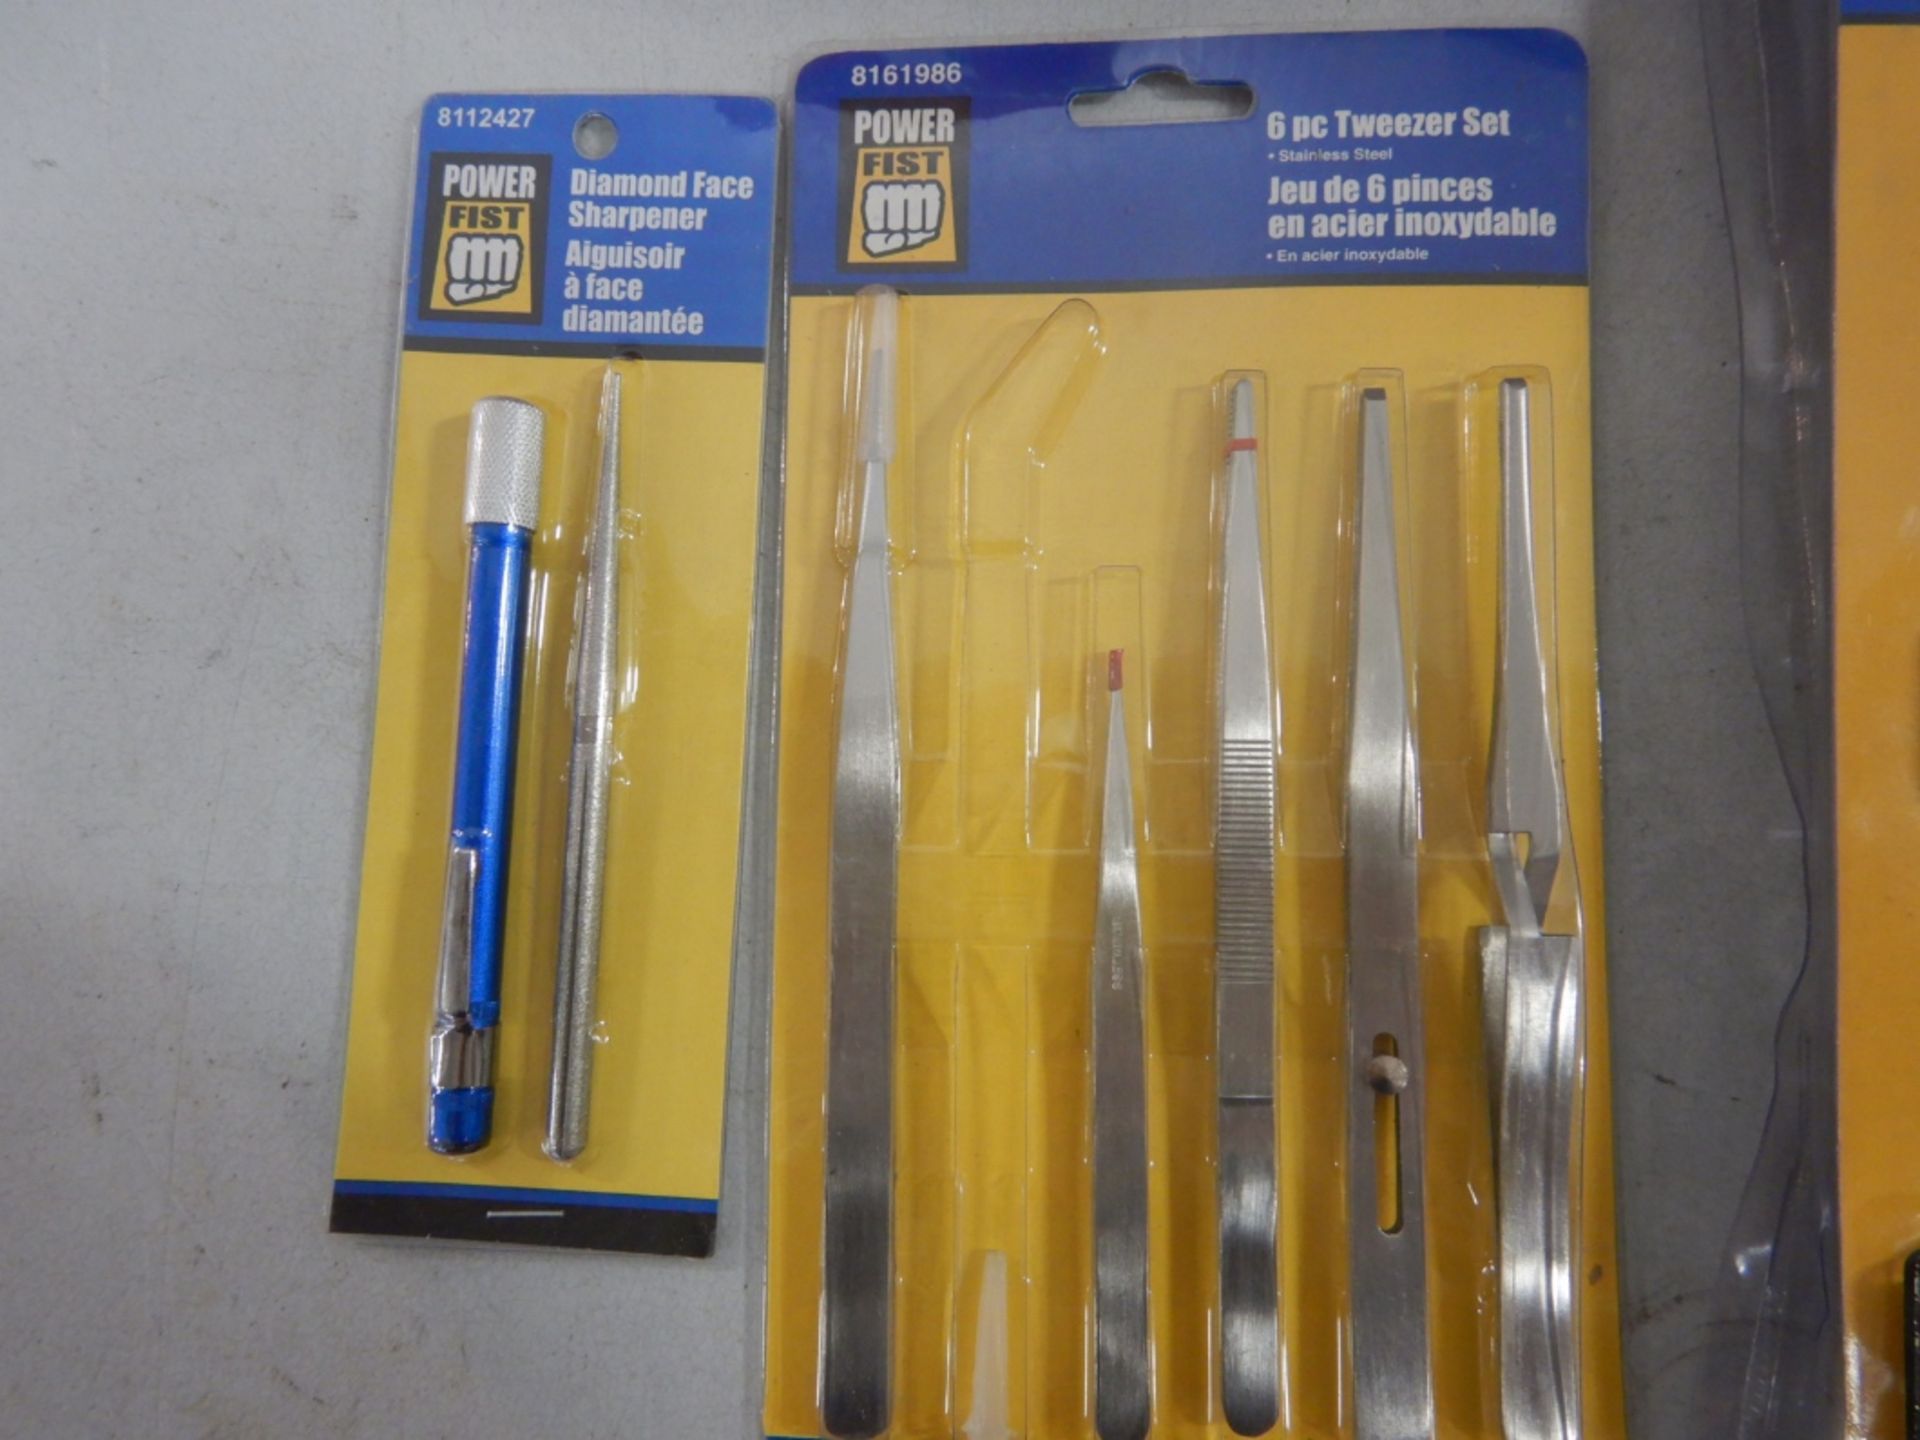 HOLLOW POINT PUNCH SET, PRUNING SHEARS, CIRCUIT TESTER, & ASSORTED TOOLS, ETC. - Image 6 of 6